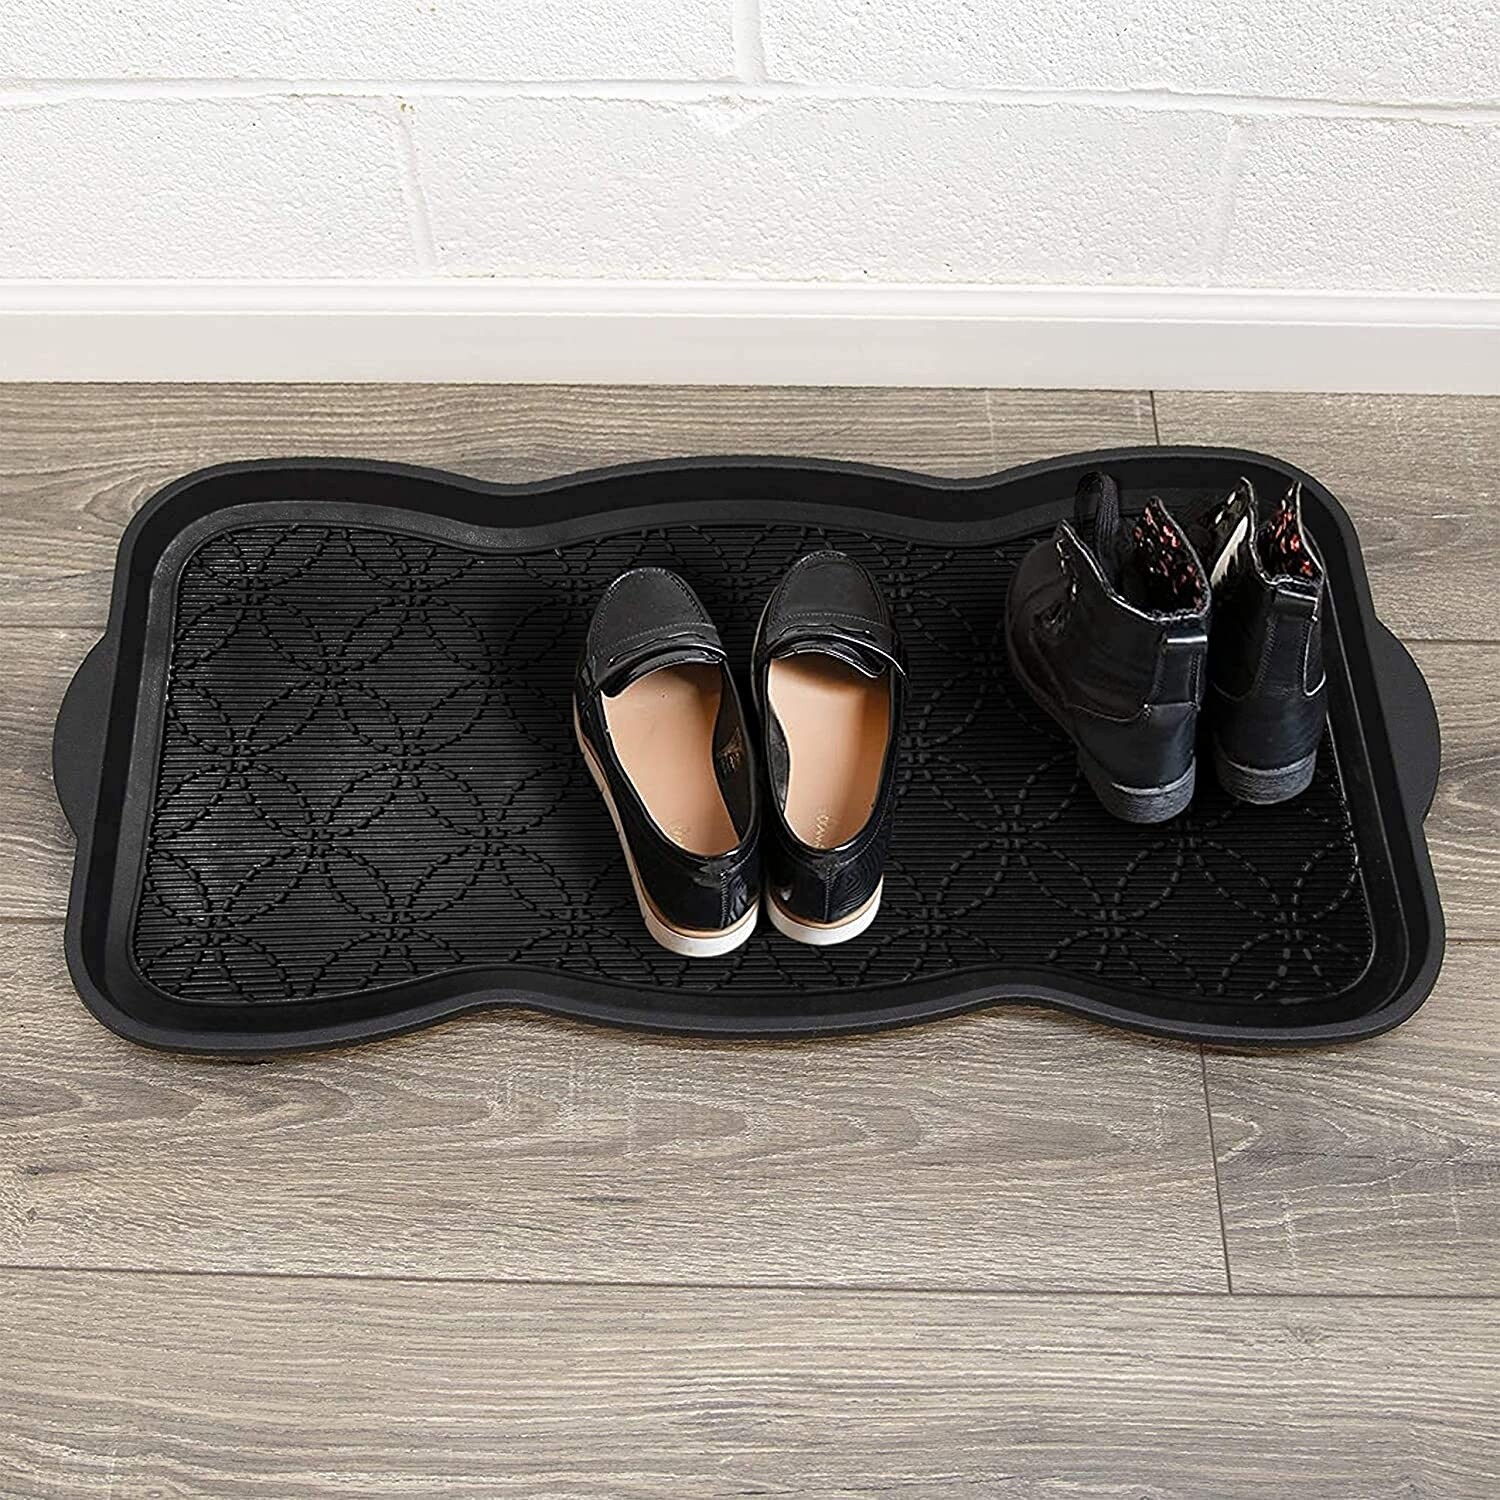 A1hc Heavy Duty Flexible and Durable 100% Rubber Hello Triangle Boot Trays Multi-Purpose for Shoes, Pets, Garden - Mudroom, Entryway, Garage and